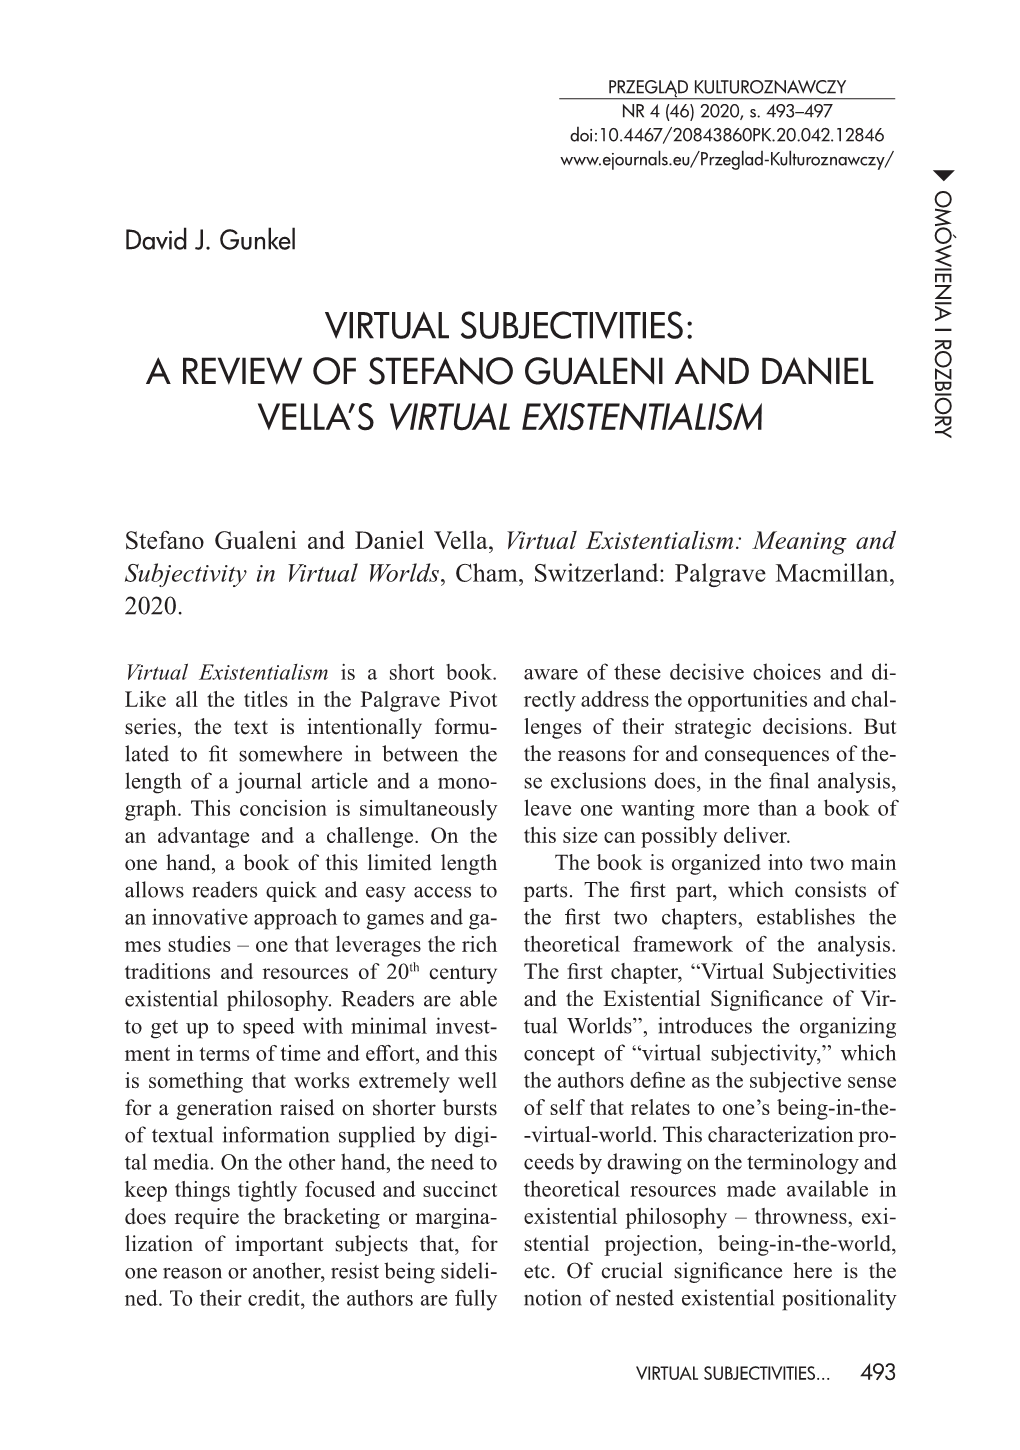 A Review of Stefano Gualeni and Daniel Vella's Virtual Existentialism